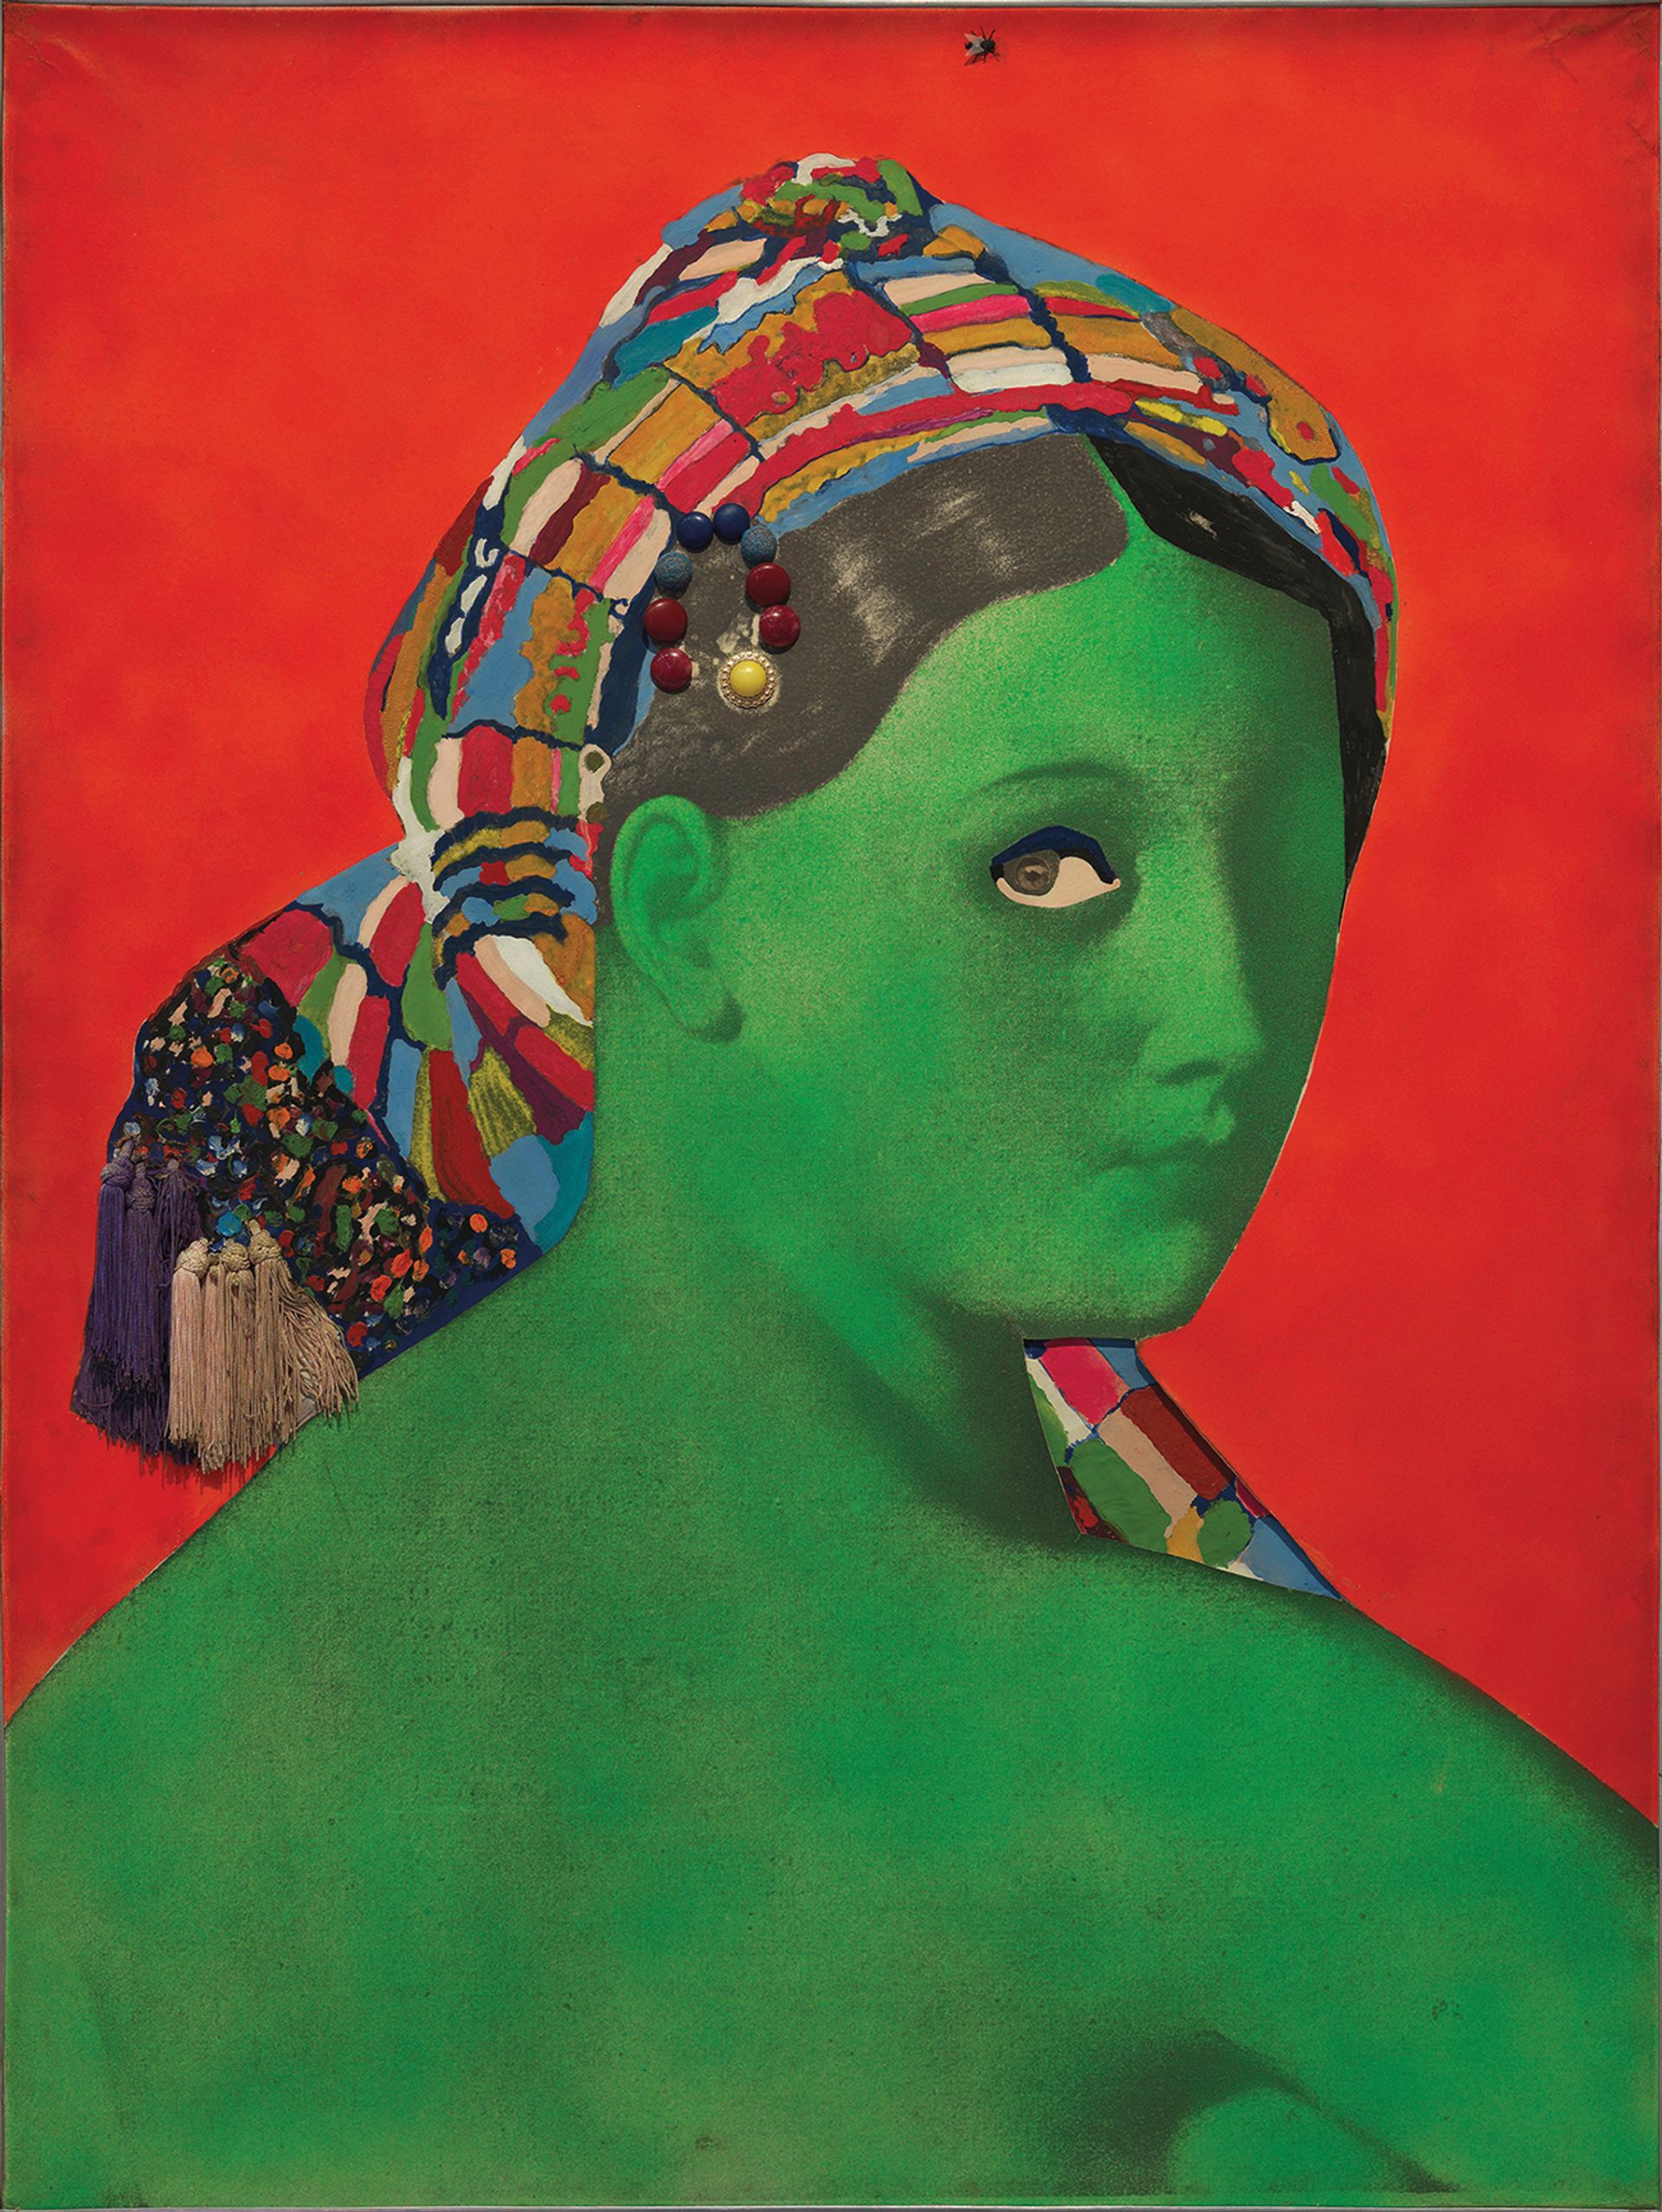 Martial Raysse's Made in Japan - La Grande Odalisque (1964) is part of a temporary exhibition at the museum © Centre Pompidou; MNAM-CCI; Dist. RMN-Grand Palais / Philippe Migeat